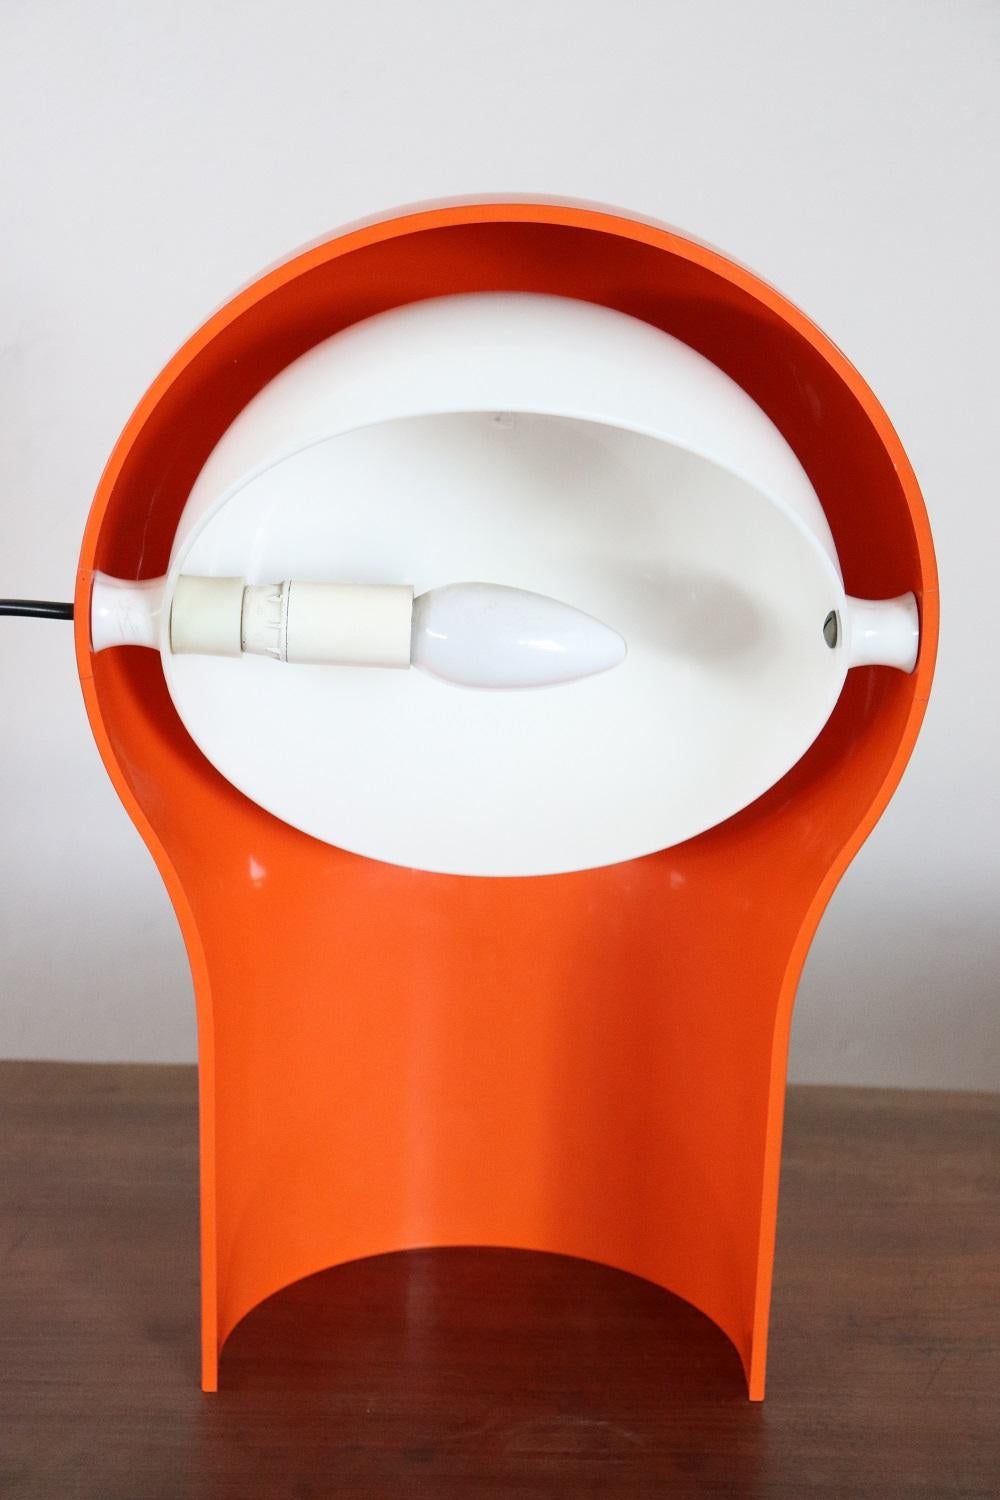 Italian design table lamp by Vico Magistretti for Artemide, 1960s, with one light. The body is in plastic orange color and the shade is white color. Shade adjusts up and down. Perfect for your bedside table or your desk. Very elegant, for vintage